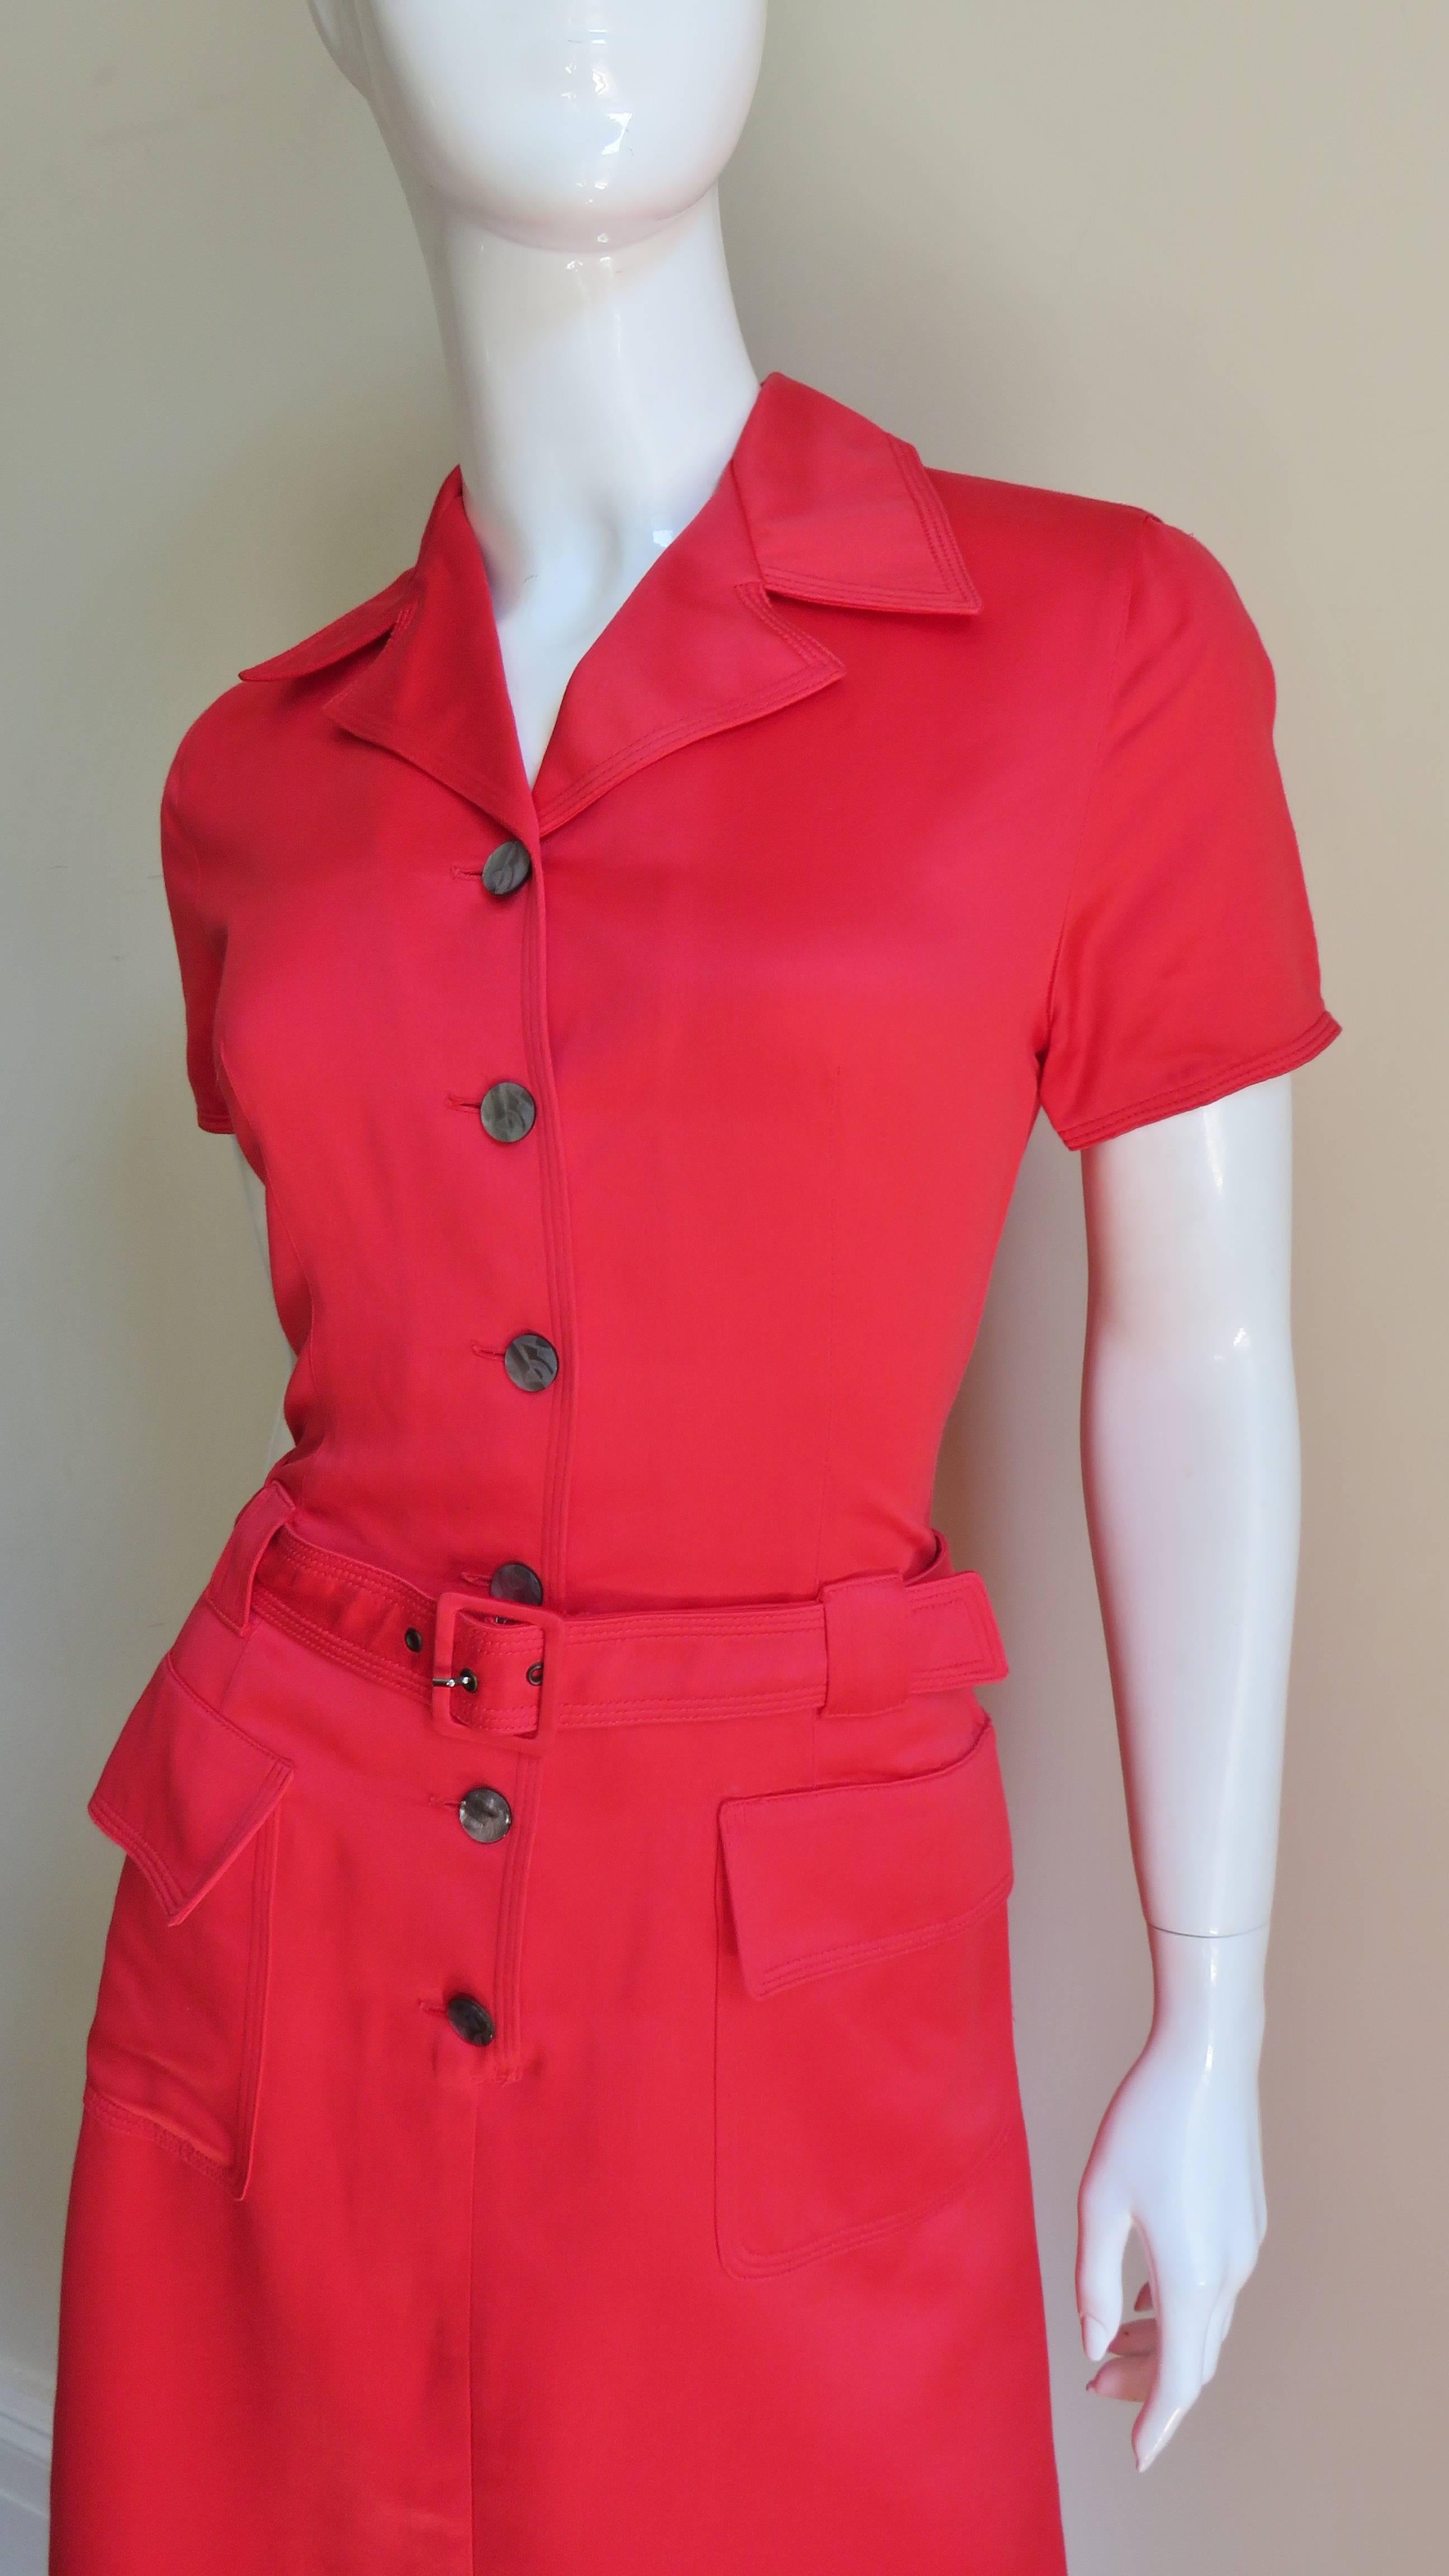 A great little red cotton blend dress from Salvatore Ferragamo.  It has a lapel collar, short sleeves, 2 front patch flap pockets and a belted waist all finished with rows of top stitching.   It closes up the front with grey mother of pearl buttons